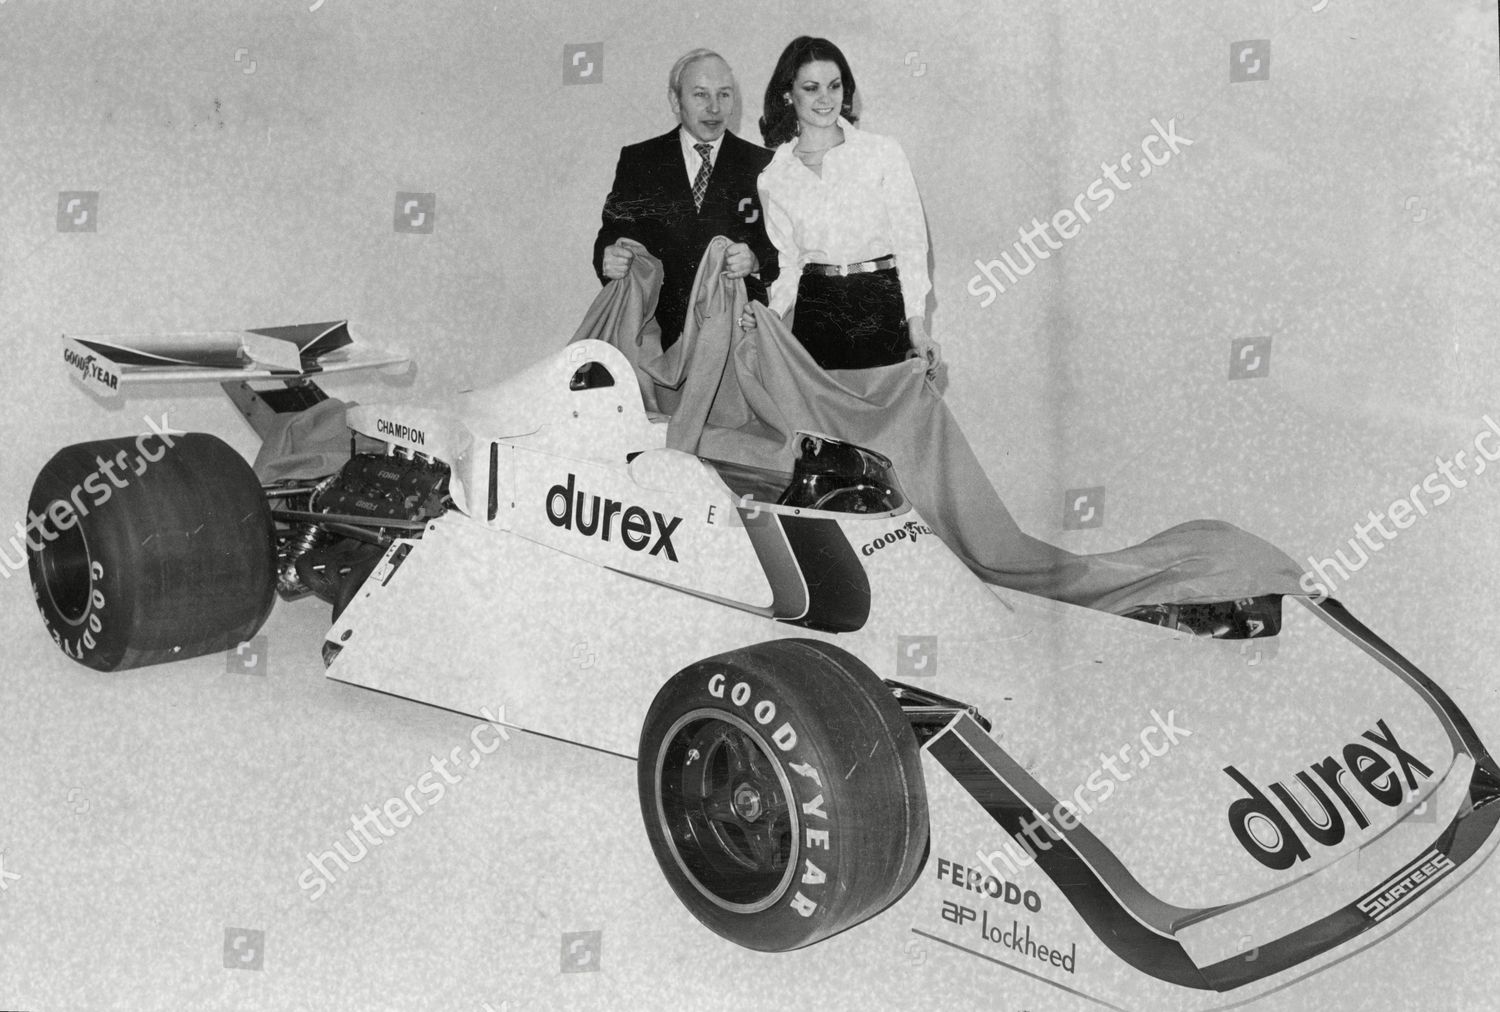 February 18,1976. John Surtees and model Vicki Harris launch a new racing car sponsored by Durex.